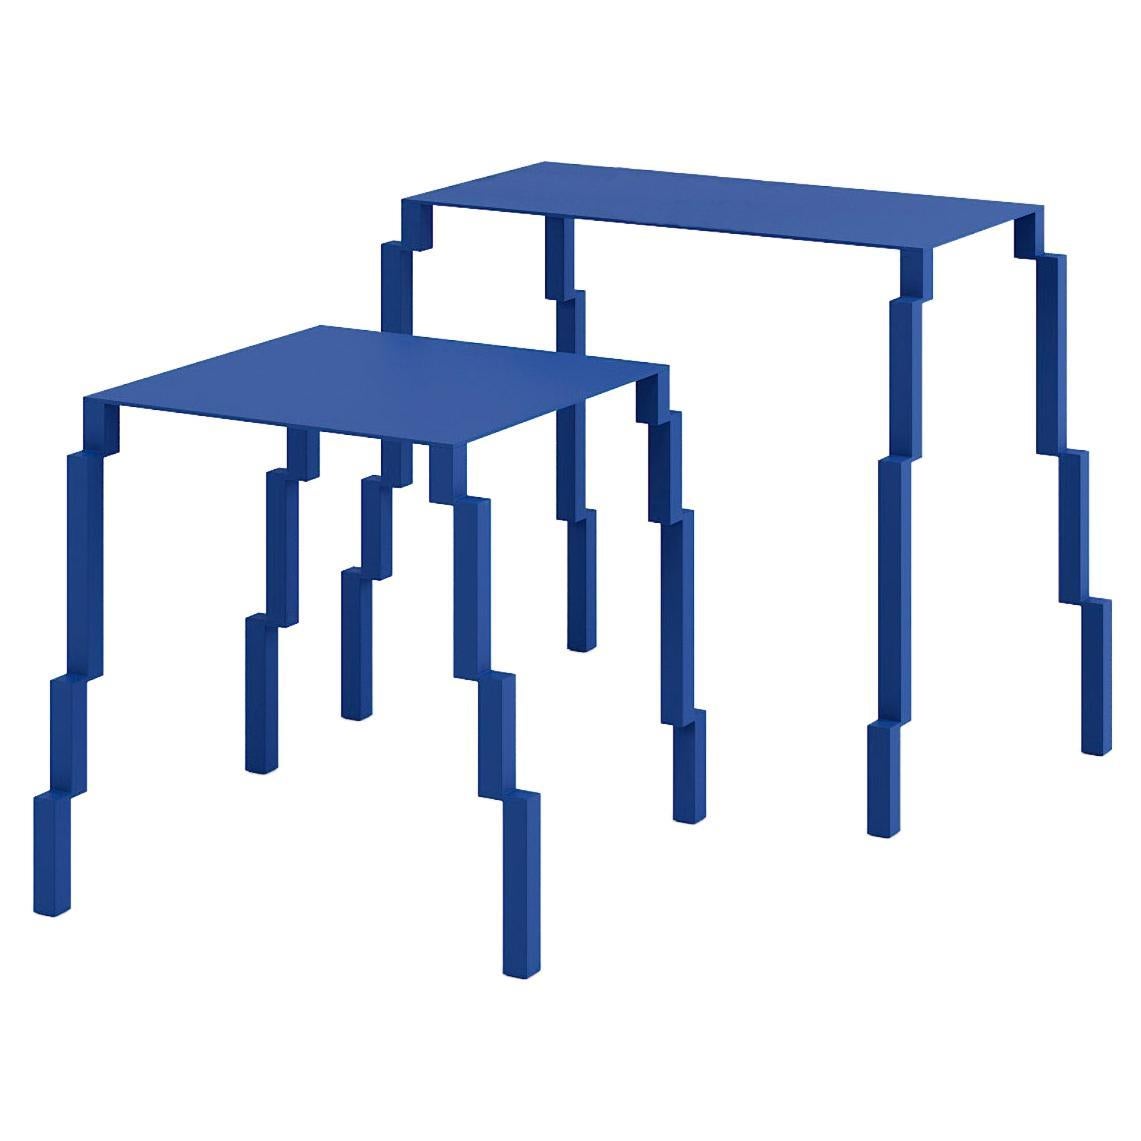 "BUG set" Side Tables (any color) by Oitoproducts